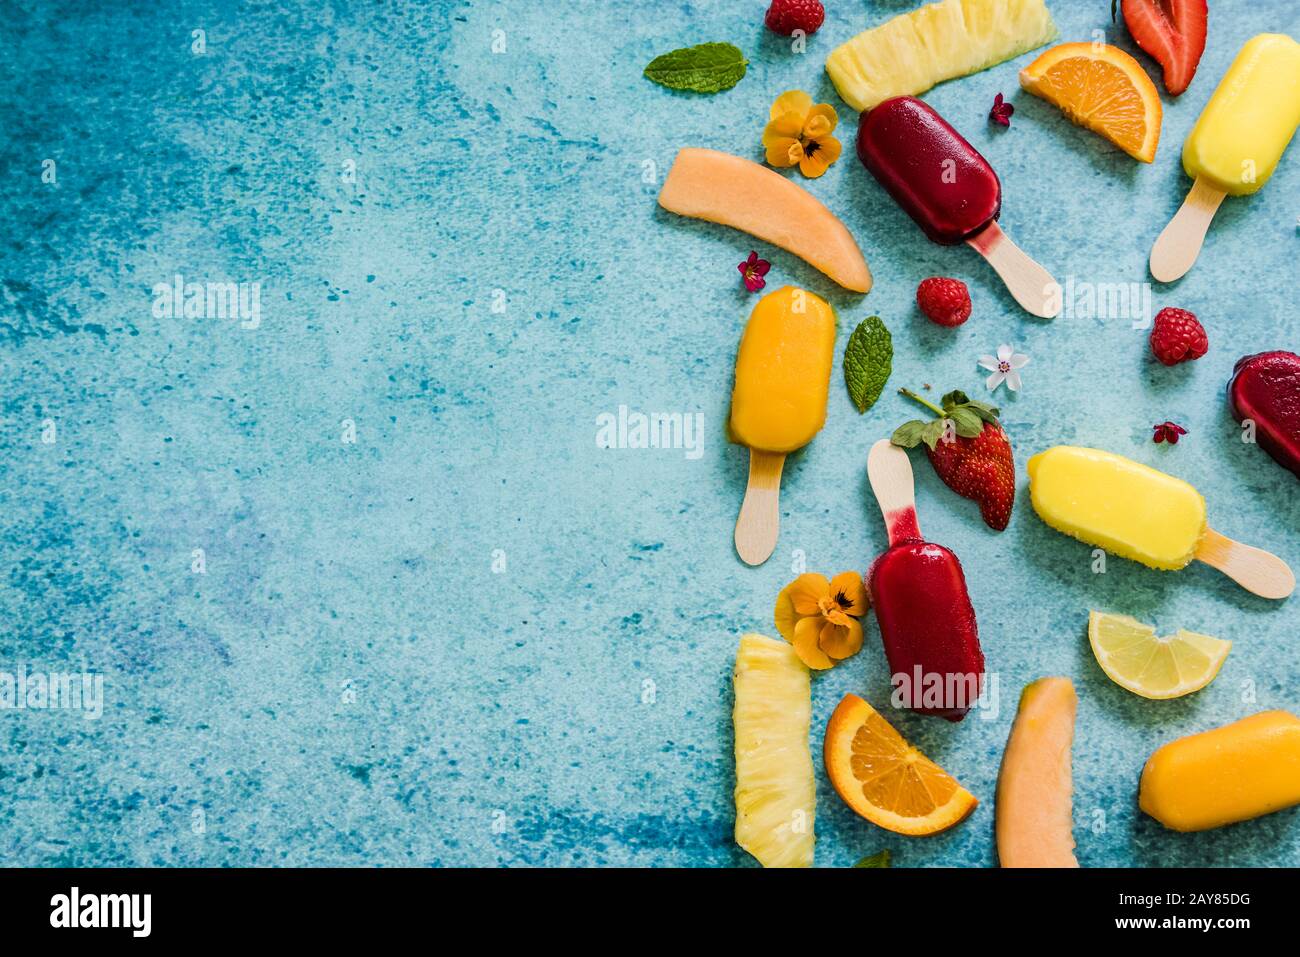 refreshing homemade popsicle from above Stock Photo